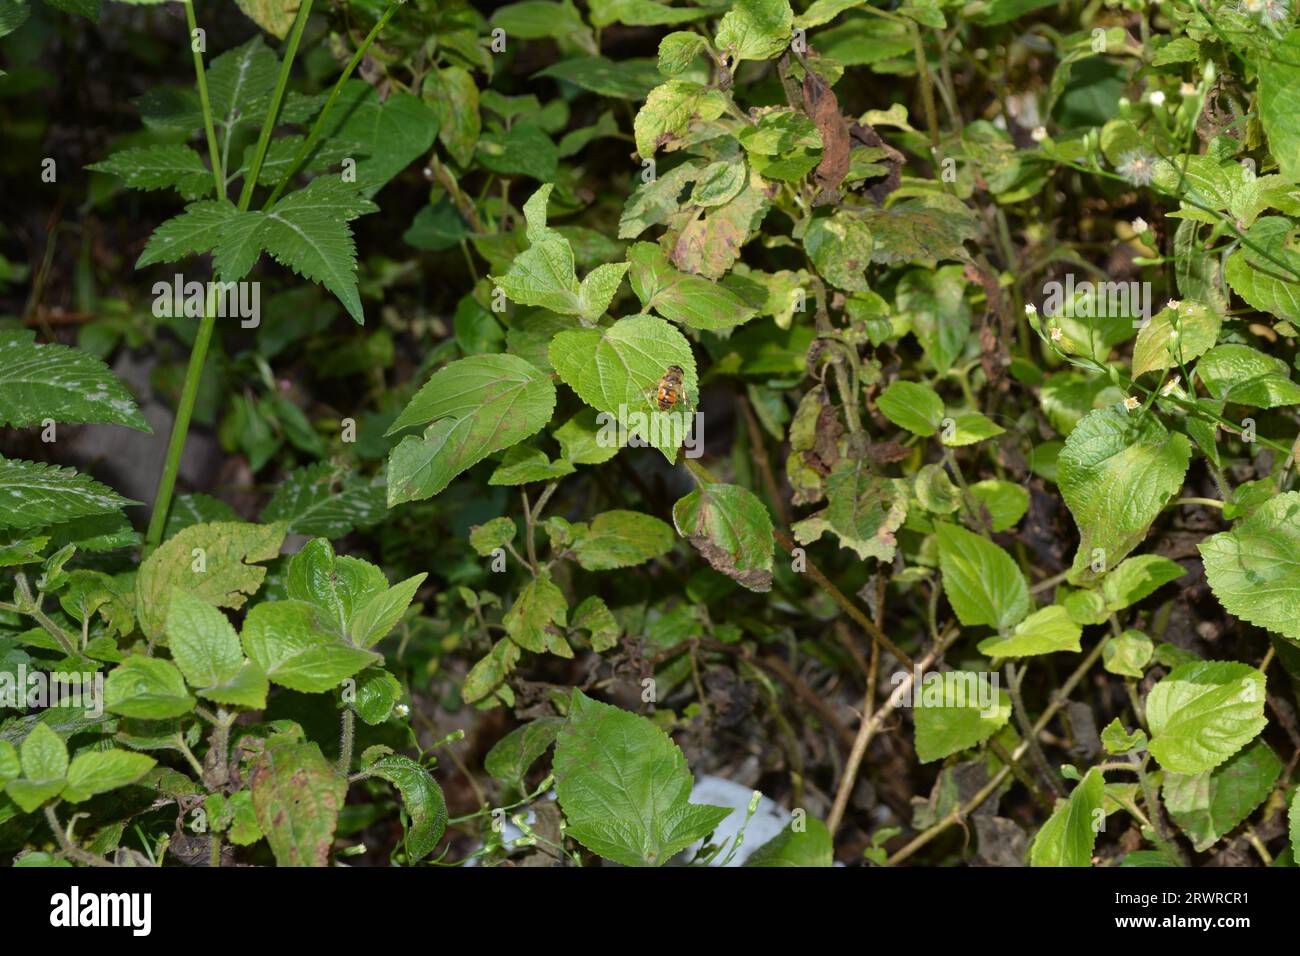 Apis mellifera (Honeybee) on a green leaf on a sunny day, with green vegetation background, Bee extinction. Stock Photo